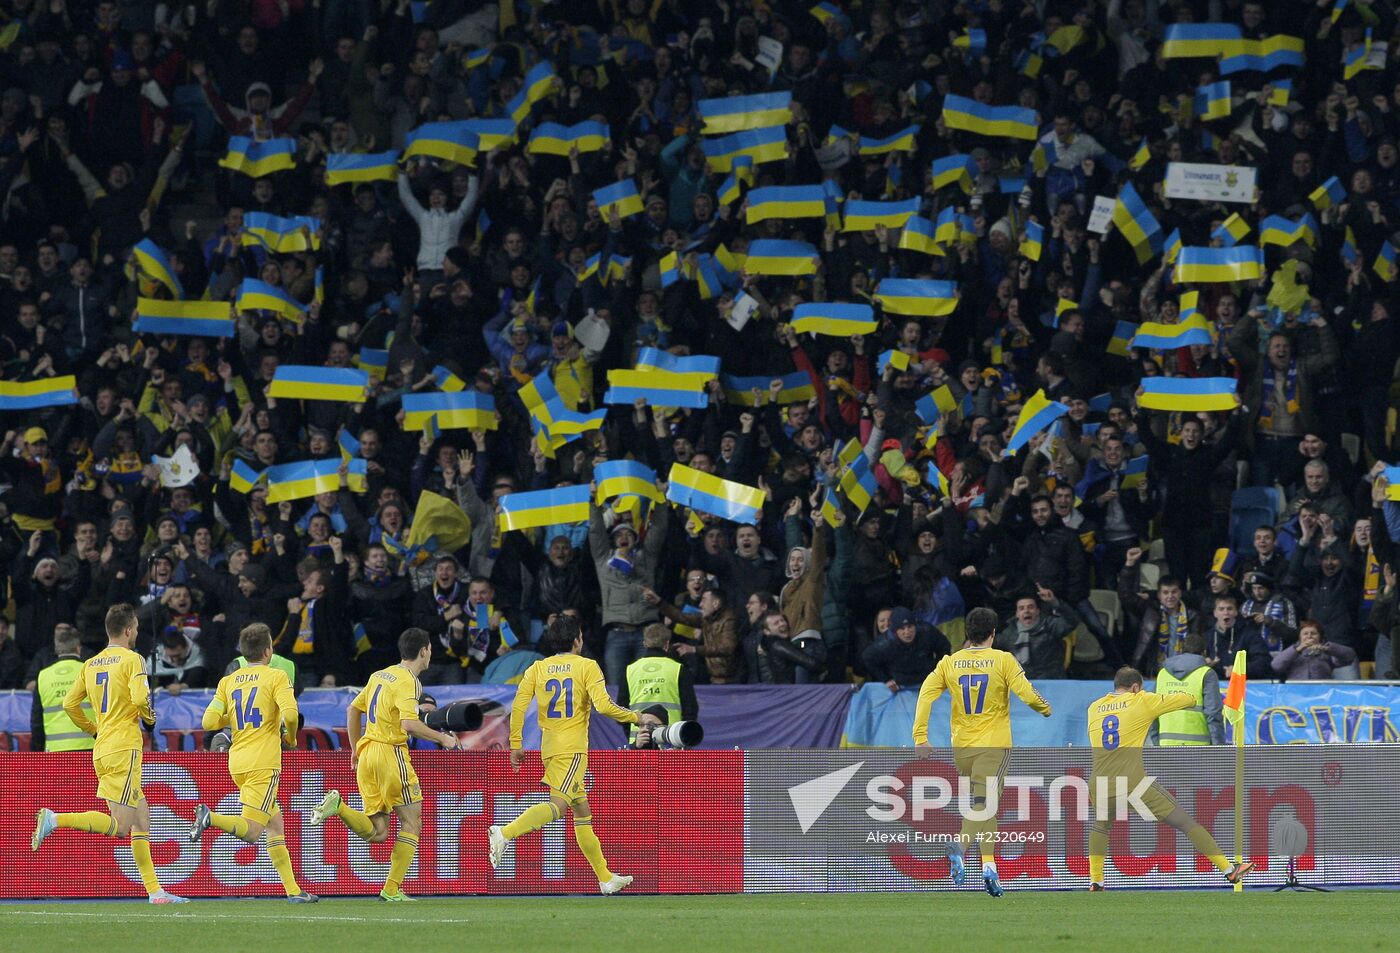 Football. Playoffs of World Cup 2014 qualifiers. Ukraine vs. France